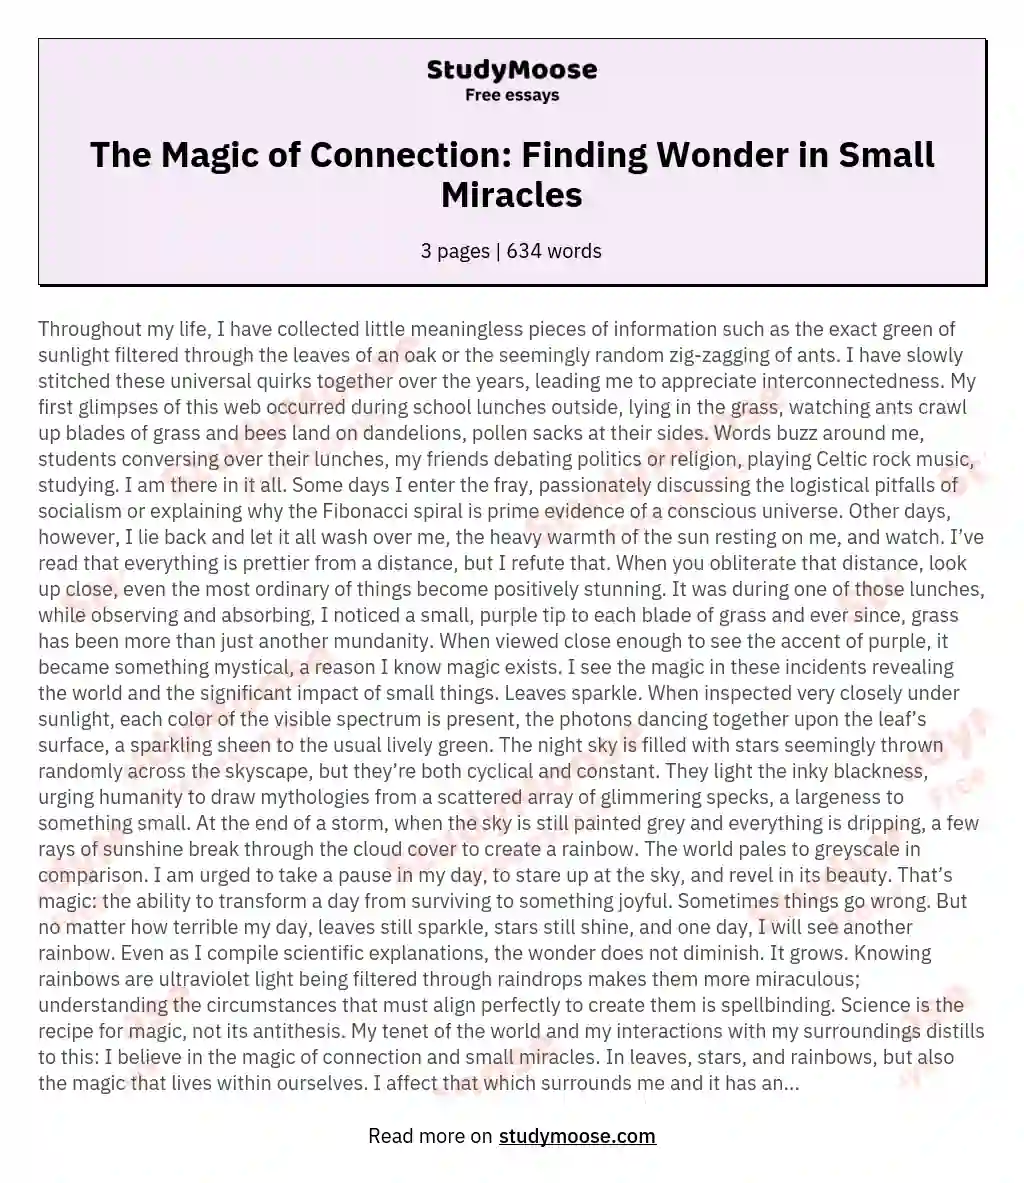 The Magic of Connection: Finding Wonder in Small Miracles essay